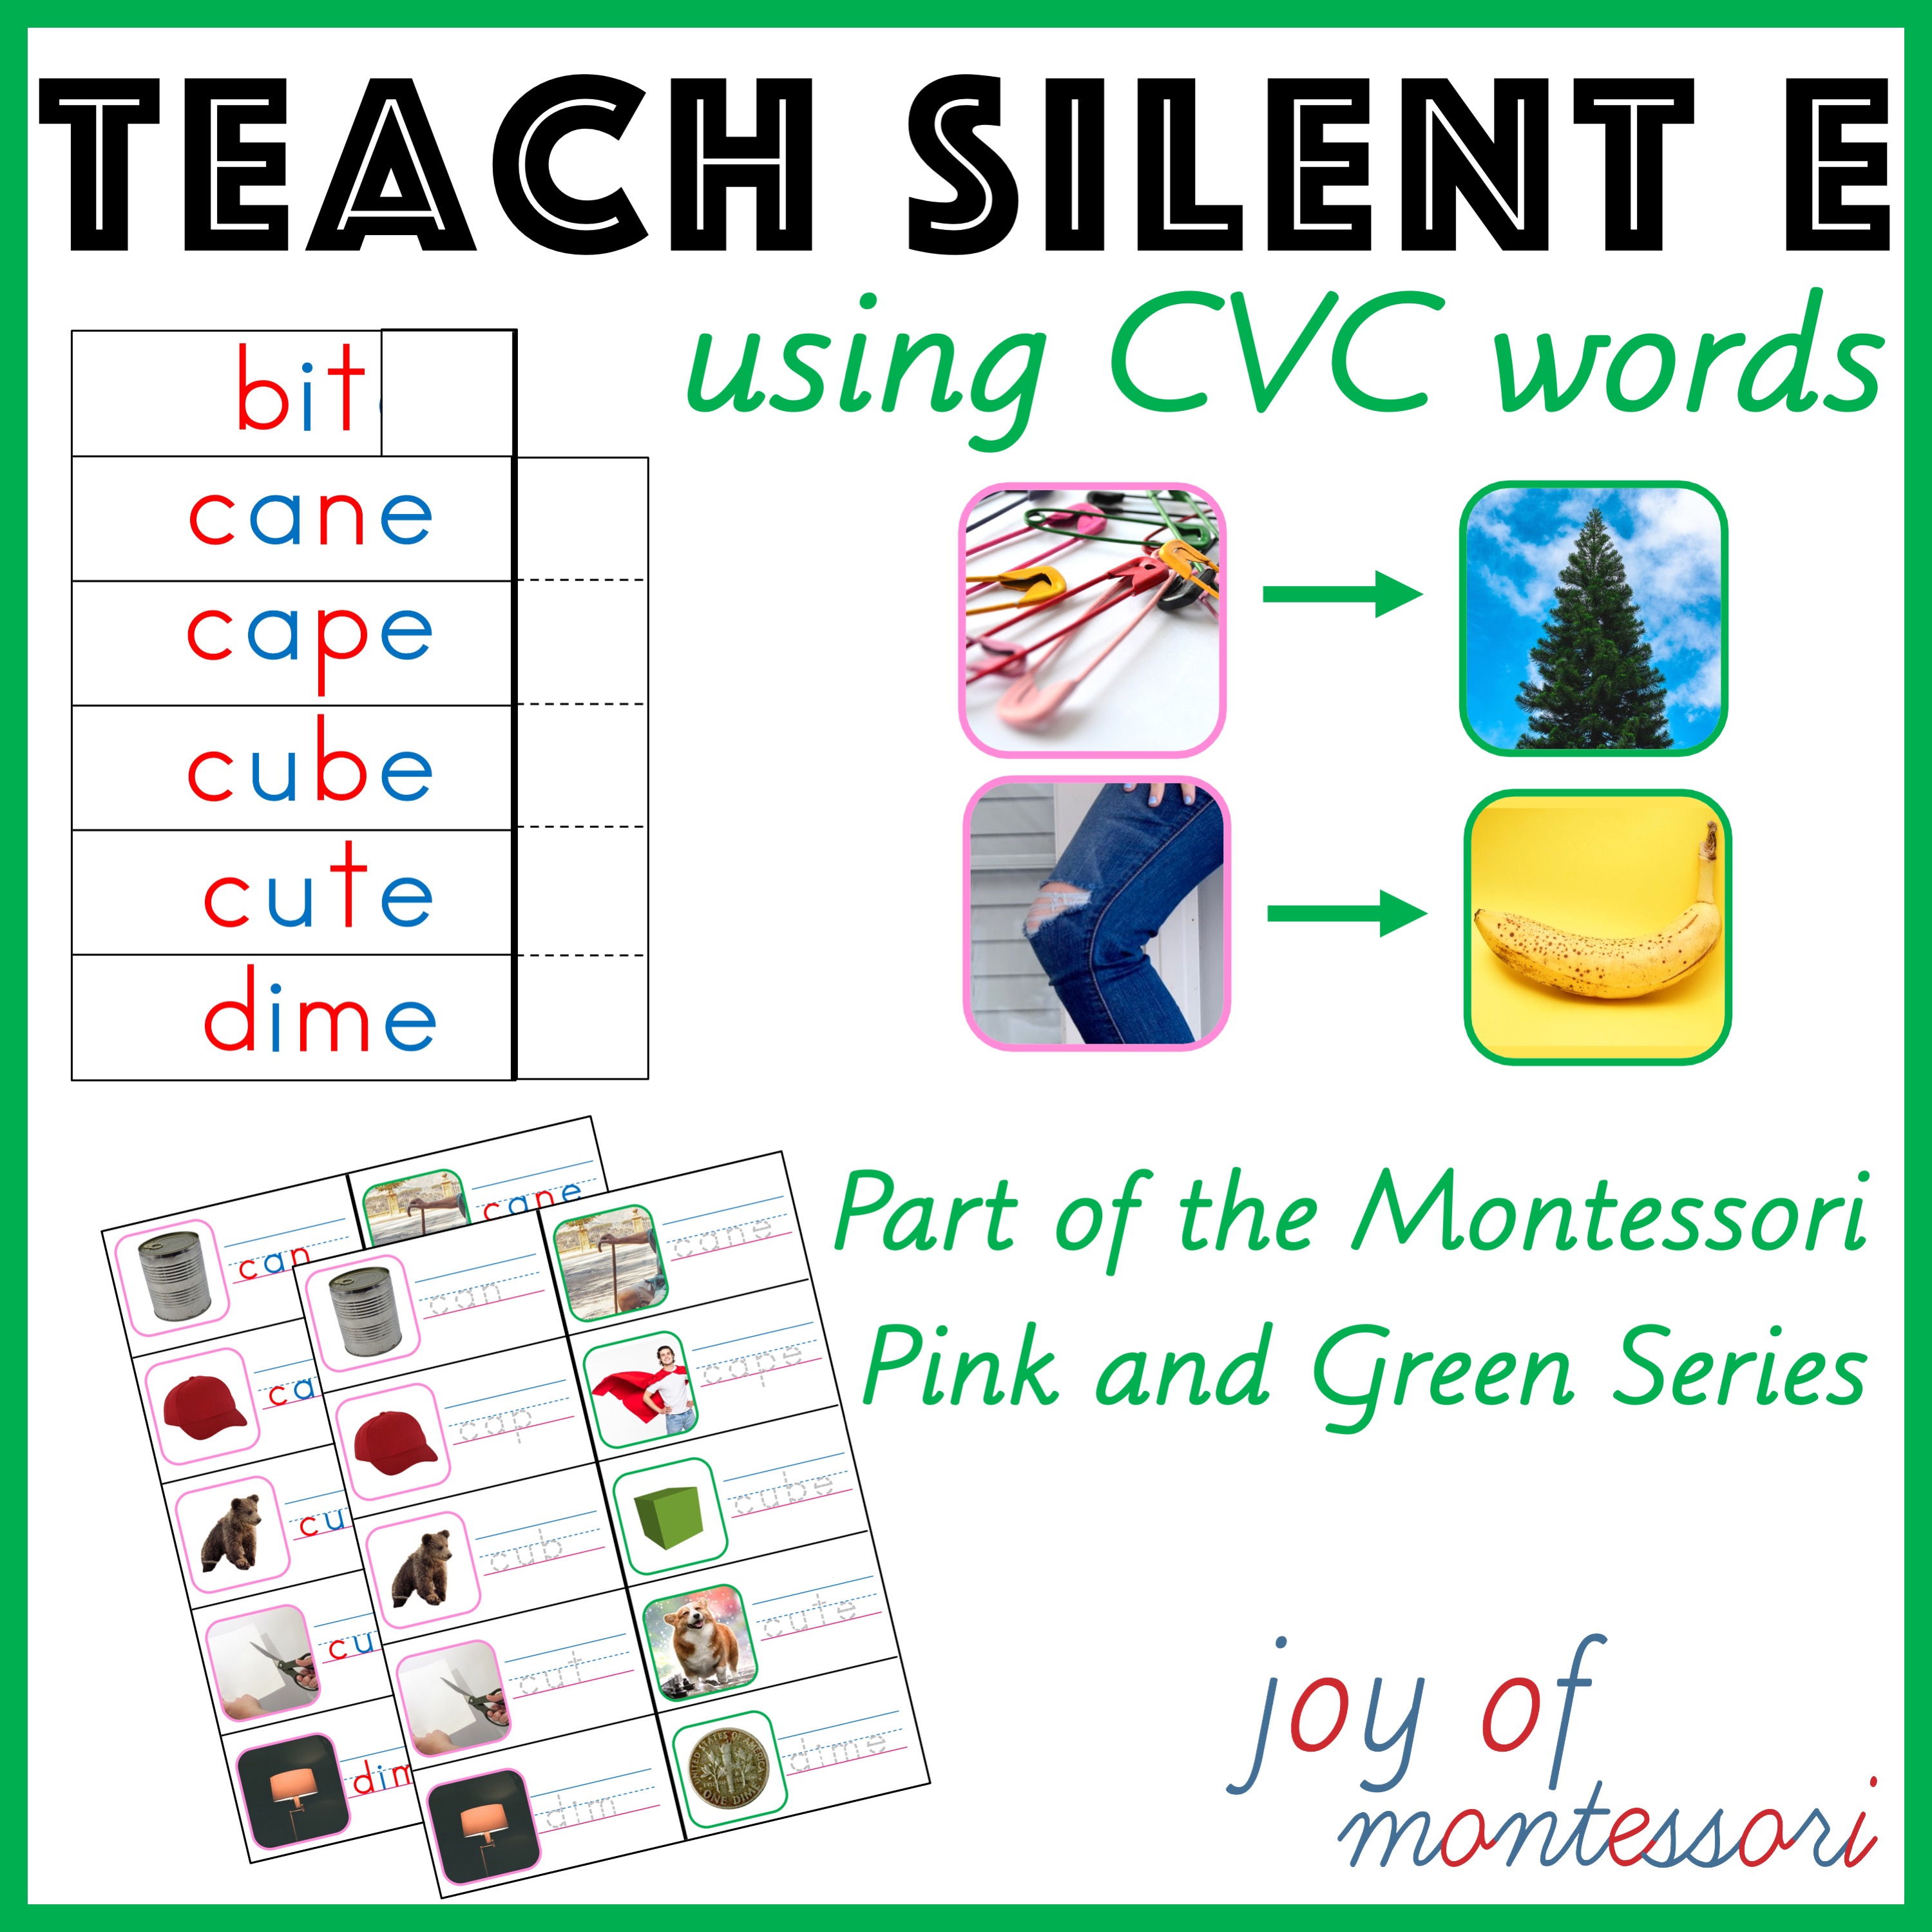 Cover images showing 3 types of products to teach final e to children.